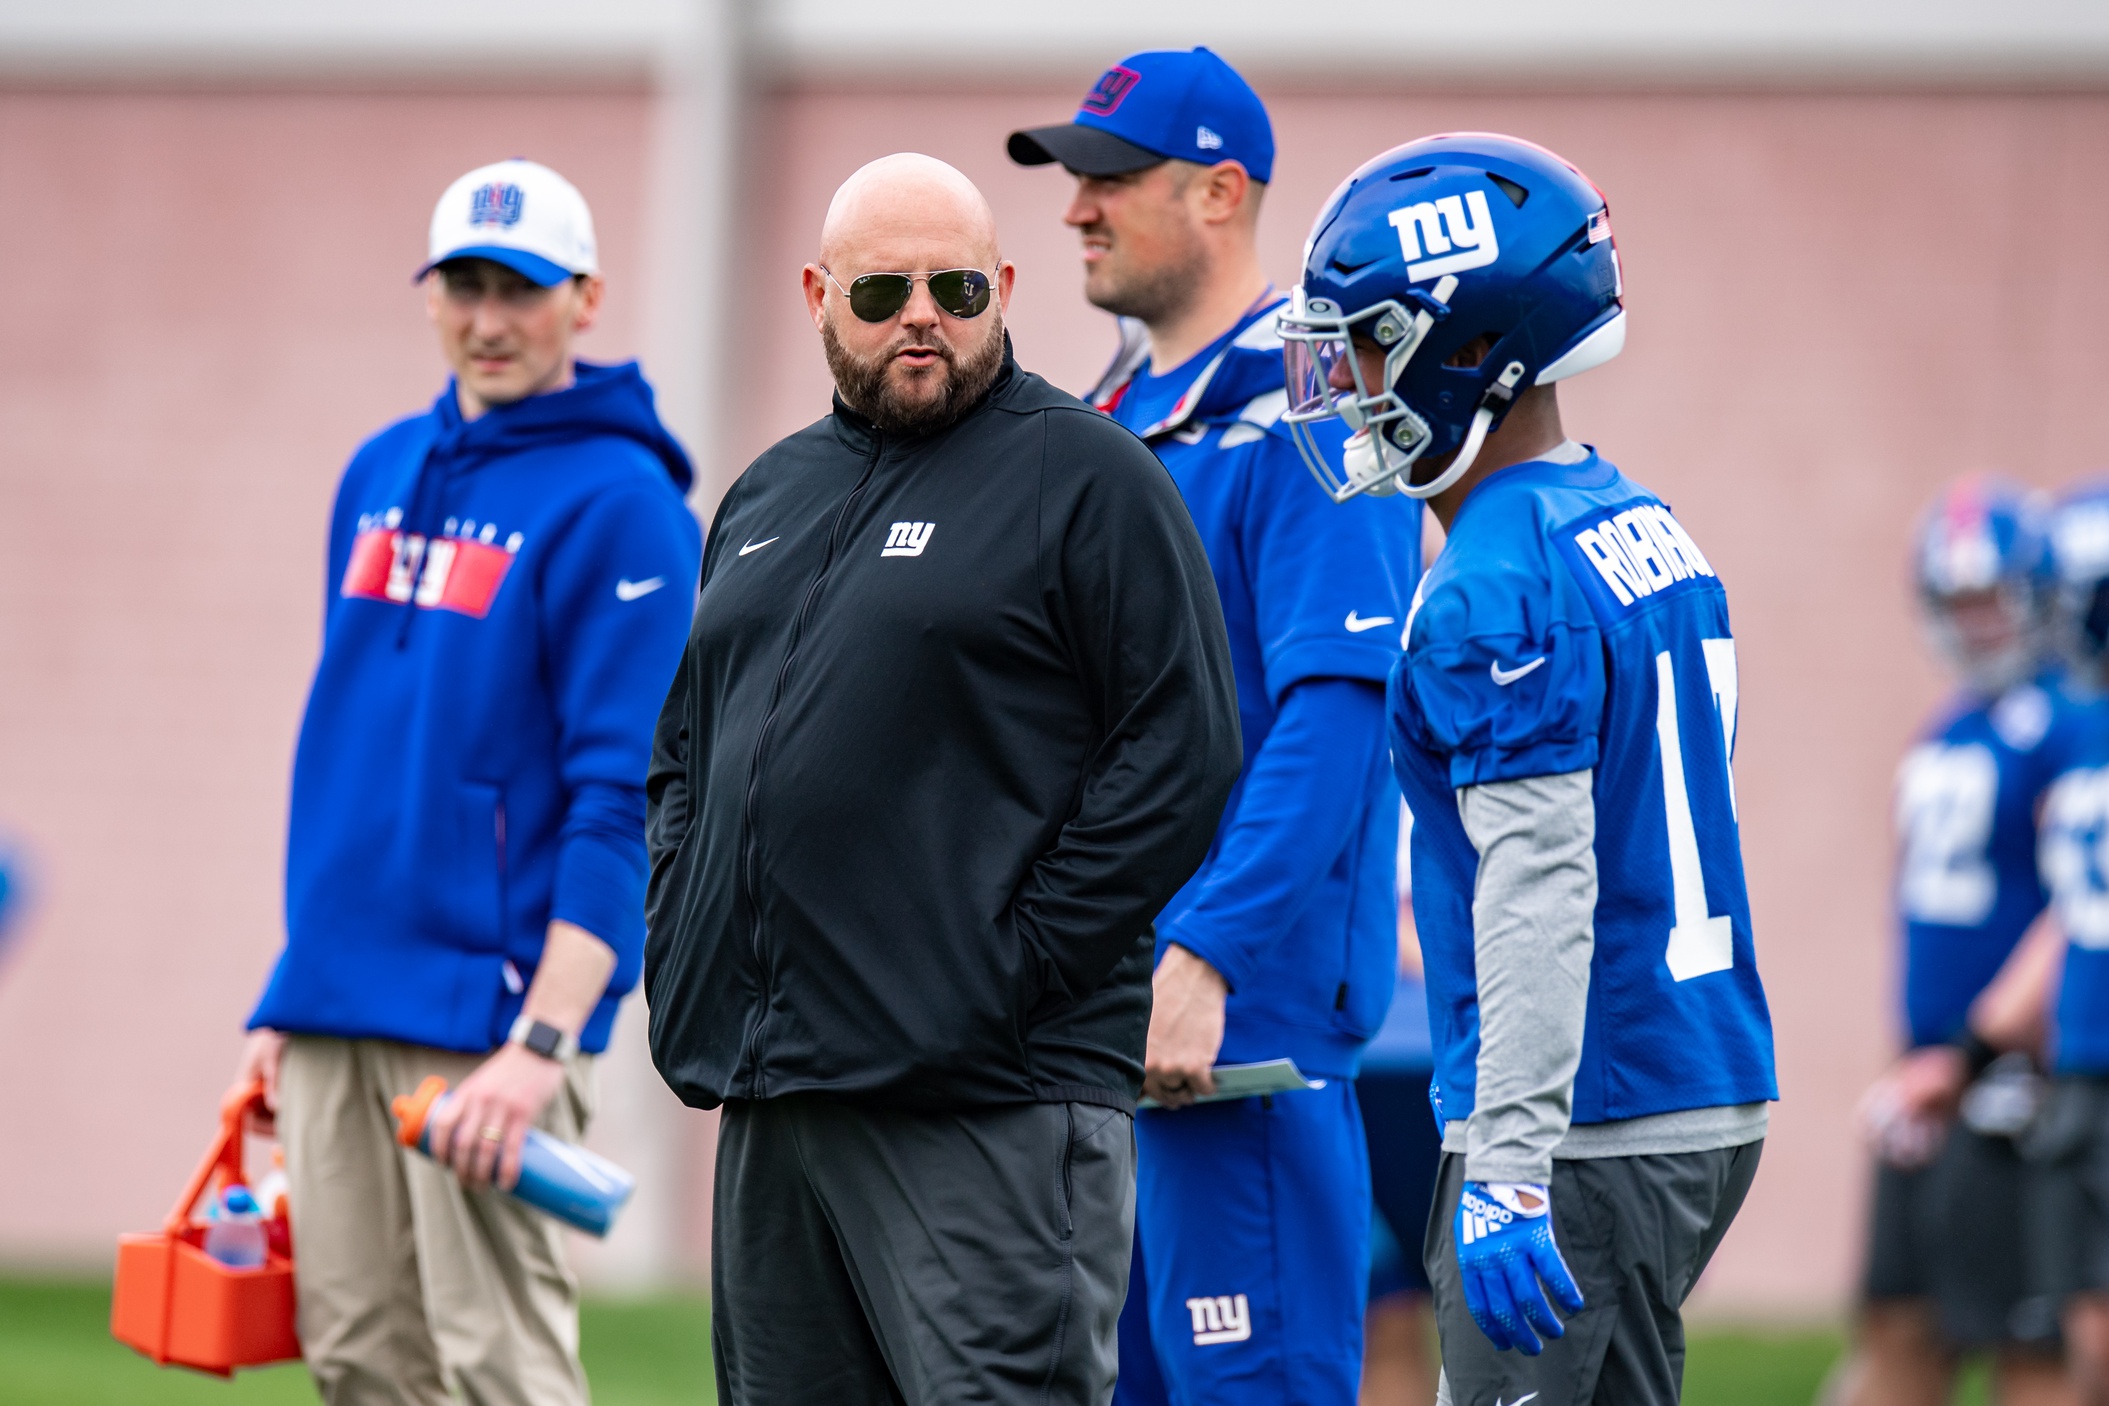 May 13, 2022; East Rutherford, NJ, USA; New York Giants head coach Brian Daboll chats with New York Giants wide receiver Wan'Dale Robinson (17) during rookie camp at Quest Diagnostics Training Center.